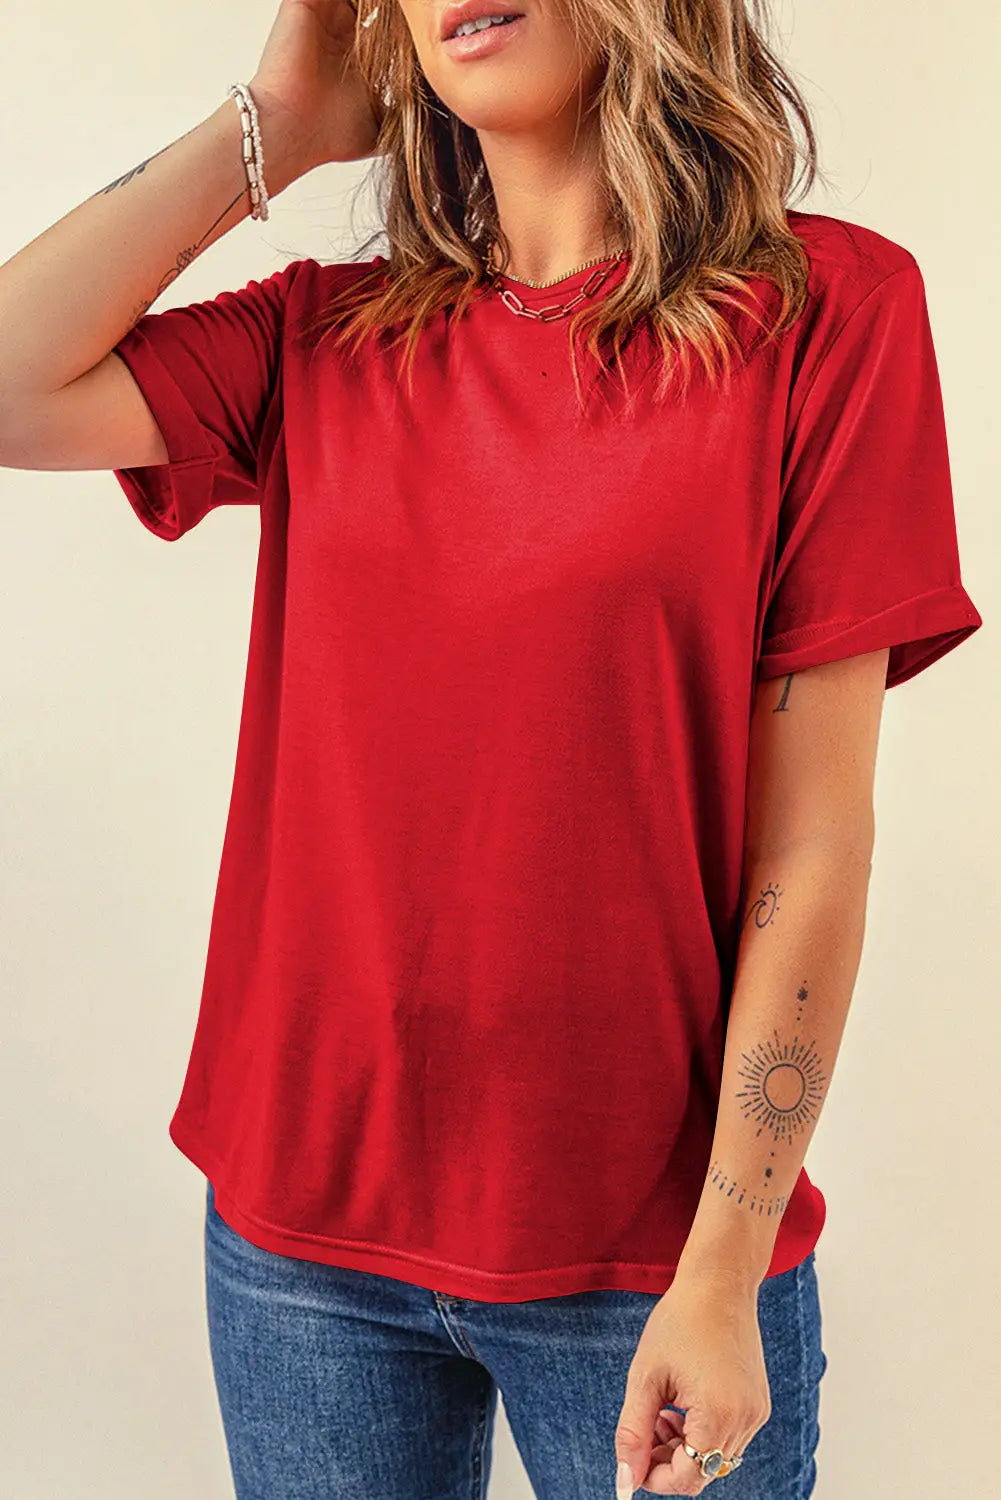 Red casual plain crew neck tee - red-2 / 2xl / 62% polyester + 32% cotton + 6% elastane - t-shirts